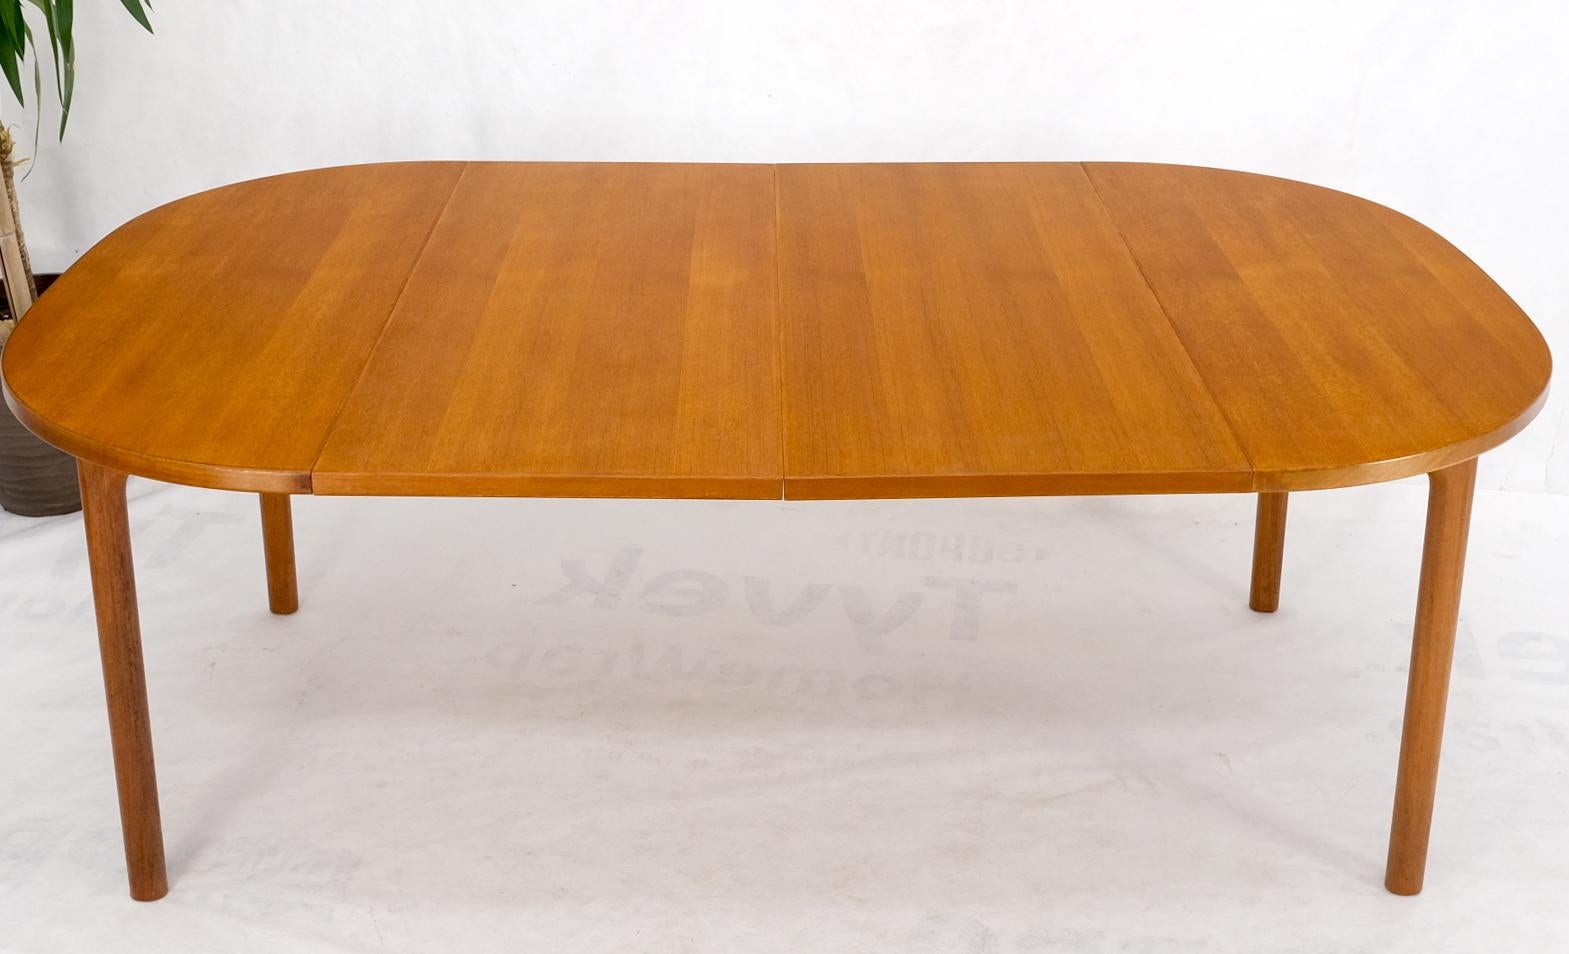 Compact Teak Danish Mid-Century Modern Dining Table w/ Large Leaves Extensions In Good Condition For Sale In Rockaway, NJ